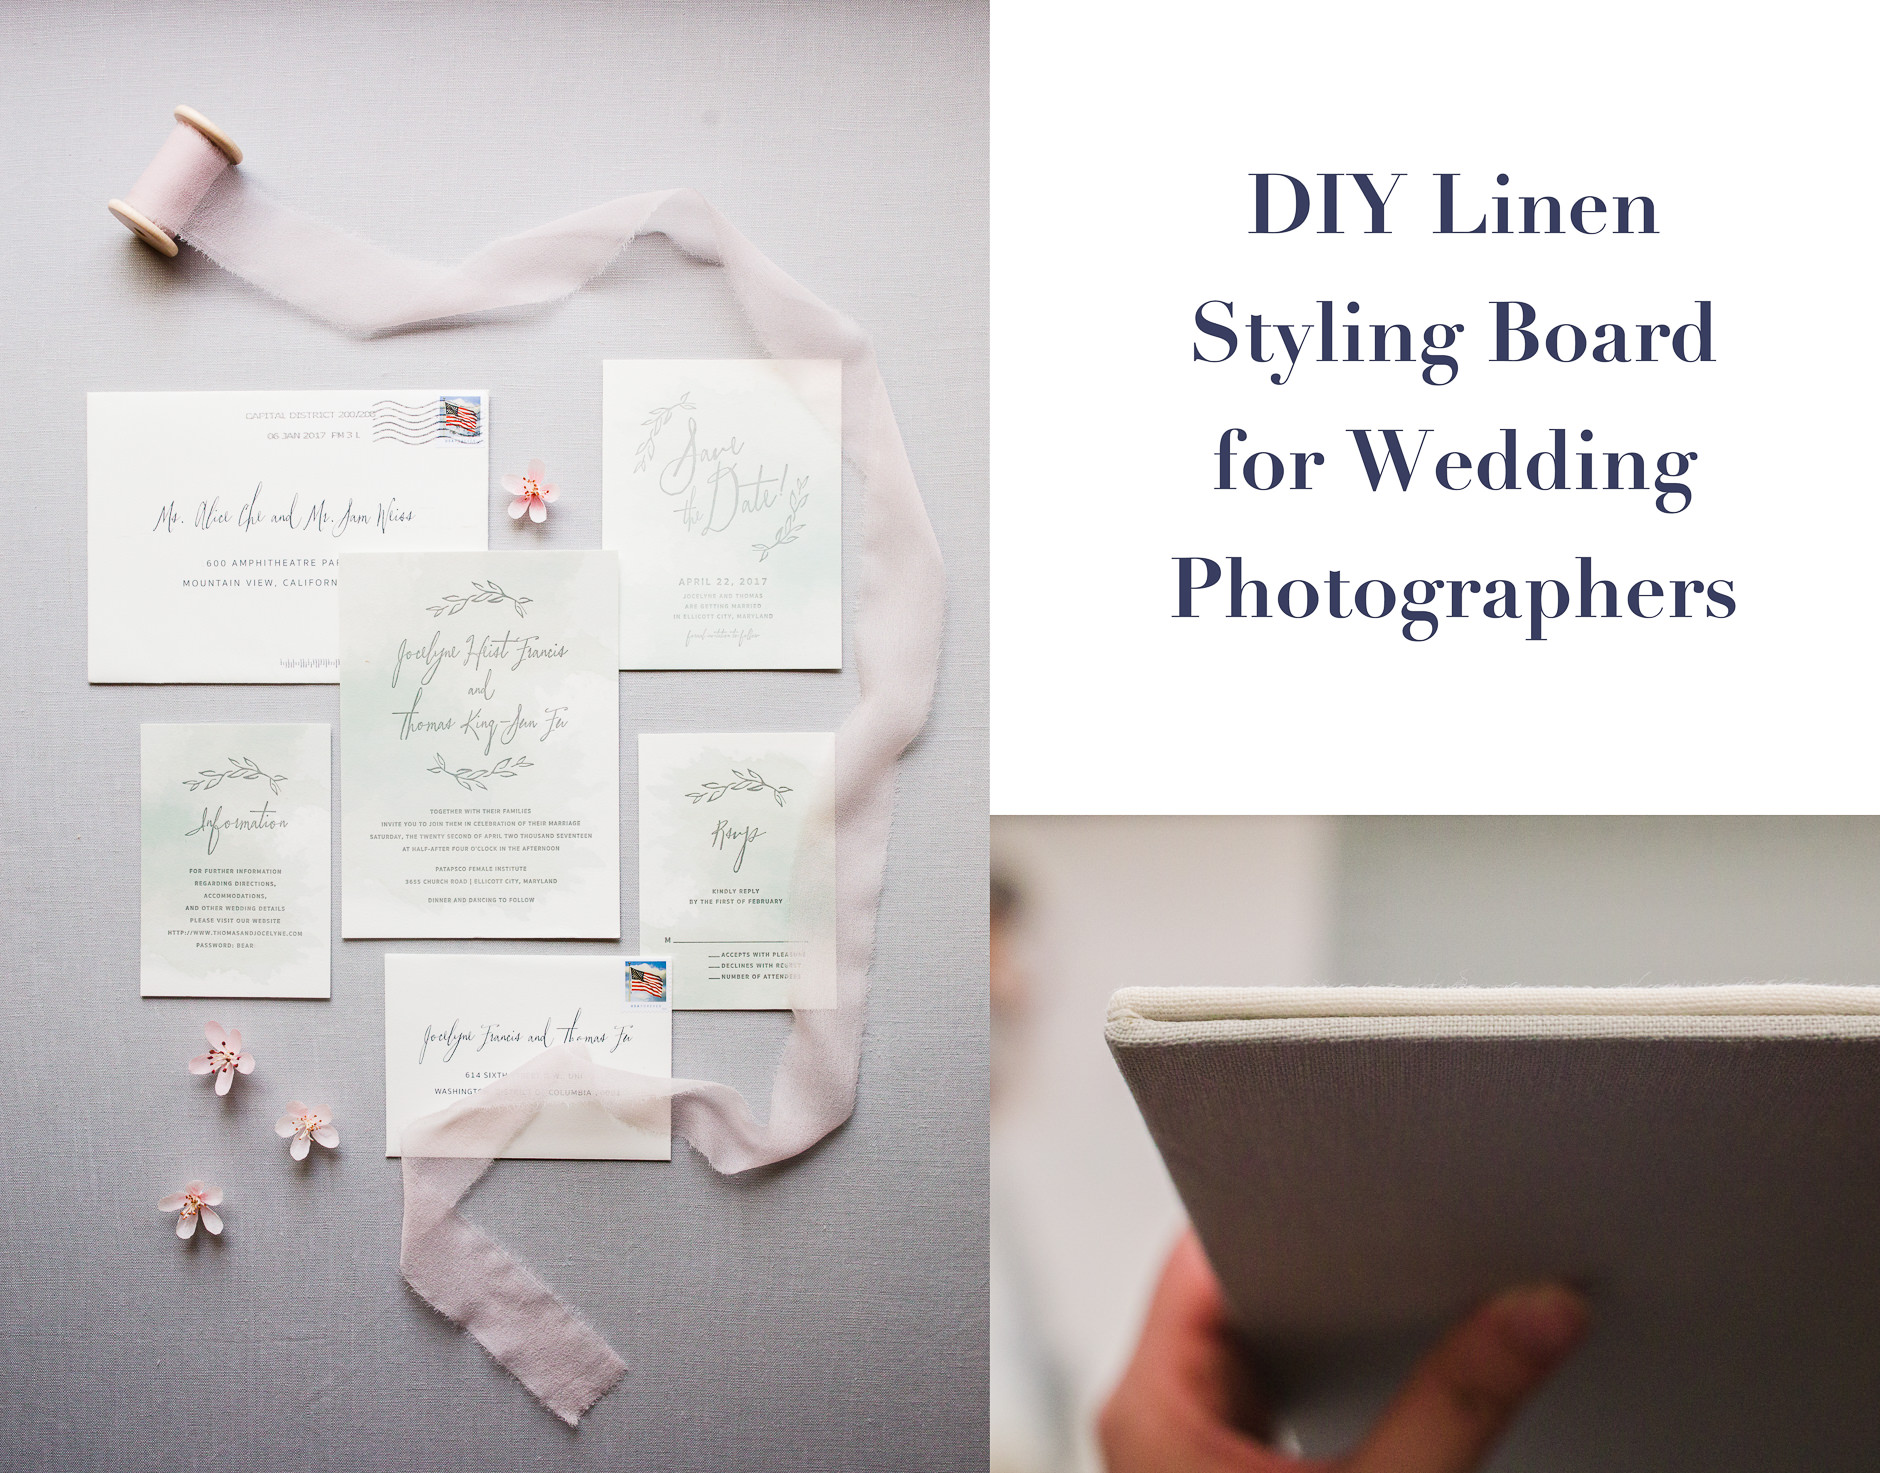 DIY Linen Styling Board for Wedding Photographers